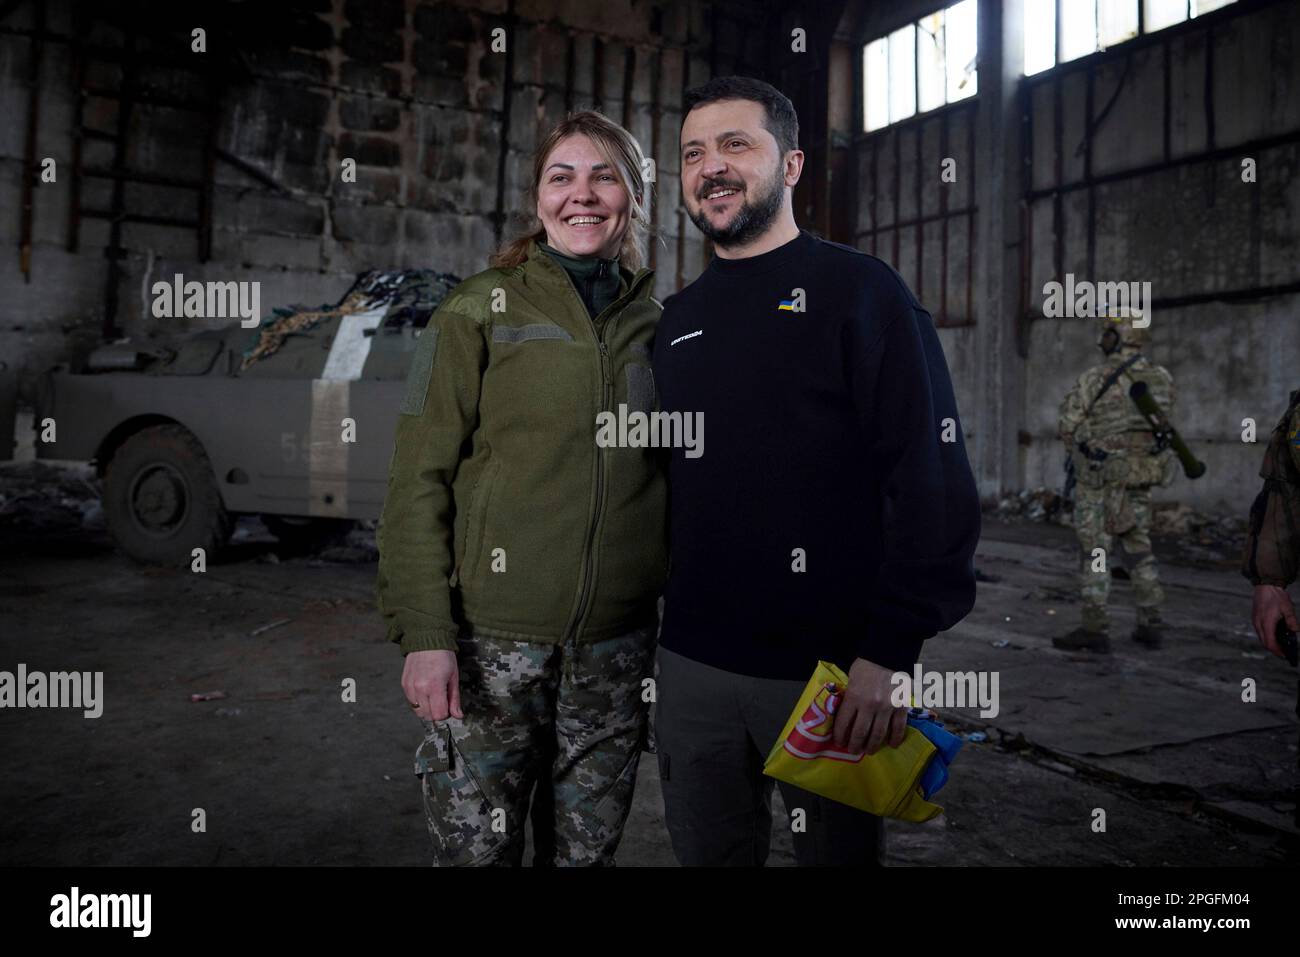 Bakhmut, Ukraine. 22nd Mar, 2023. Ukrainian President Volodymyr Zelenskyy, right, poses with a female soldier during a visit to the frontlines positions in the Donetsk region, March 22, 2023 in Bakhmut, Ukraine. Credit: Pool Photo/Ukrainian Presidential Press Office/Alamy Live News Stock Photo